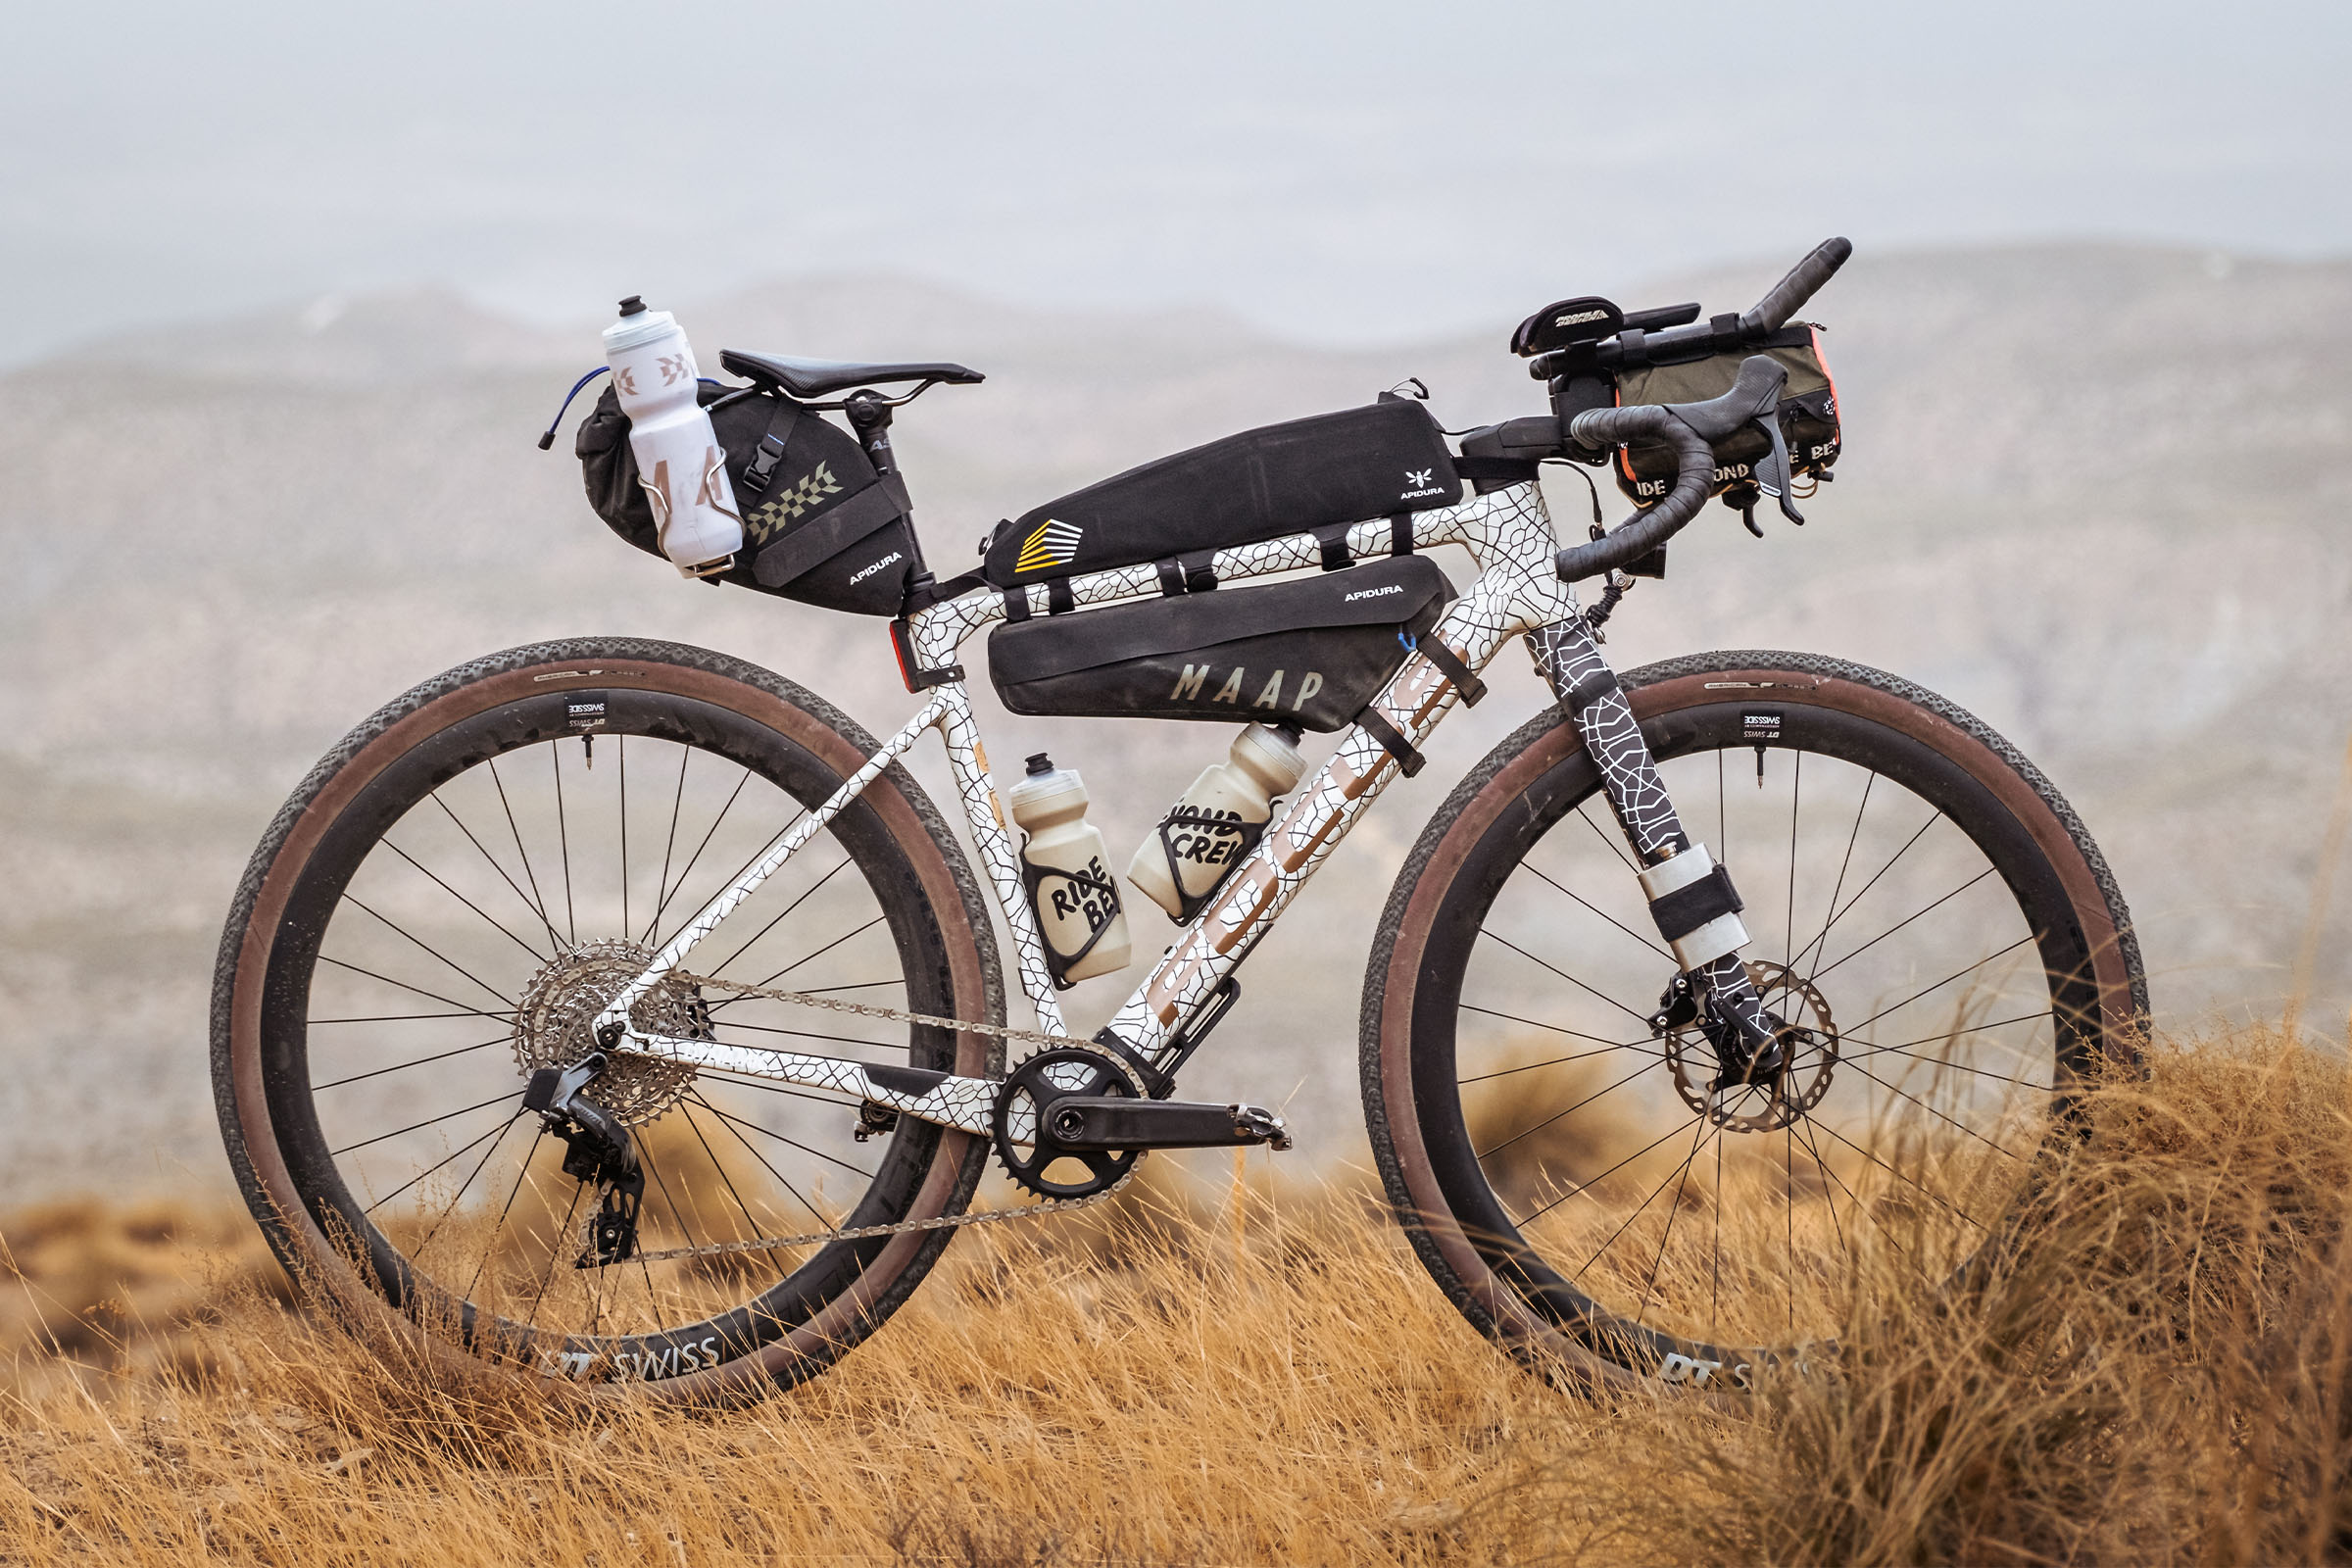 What are the advantages of bikepacking?